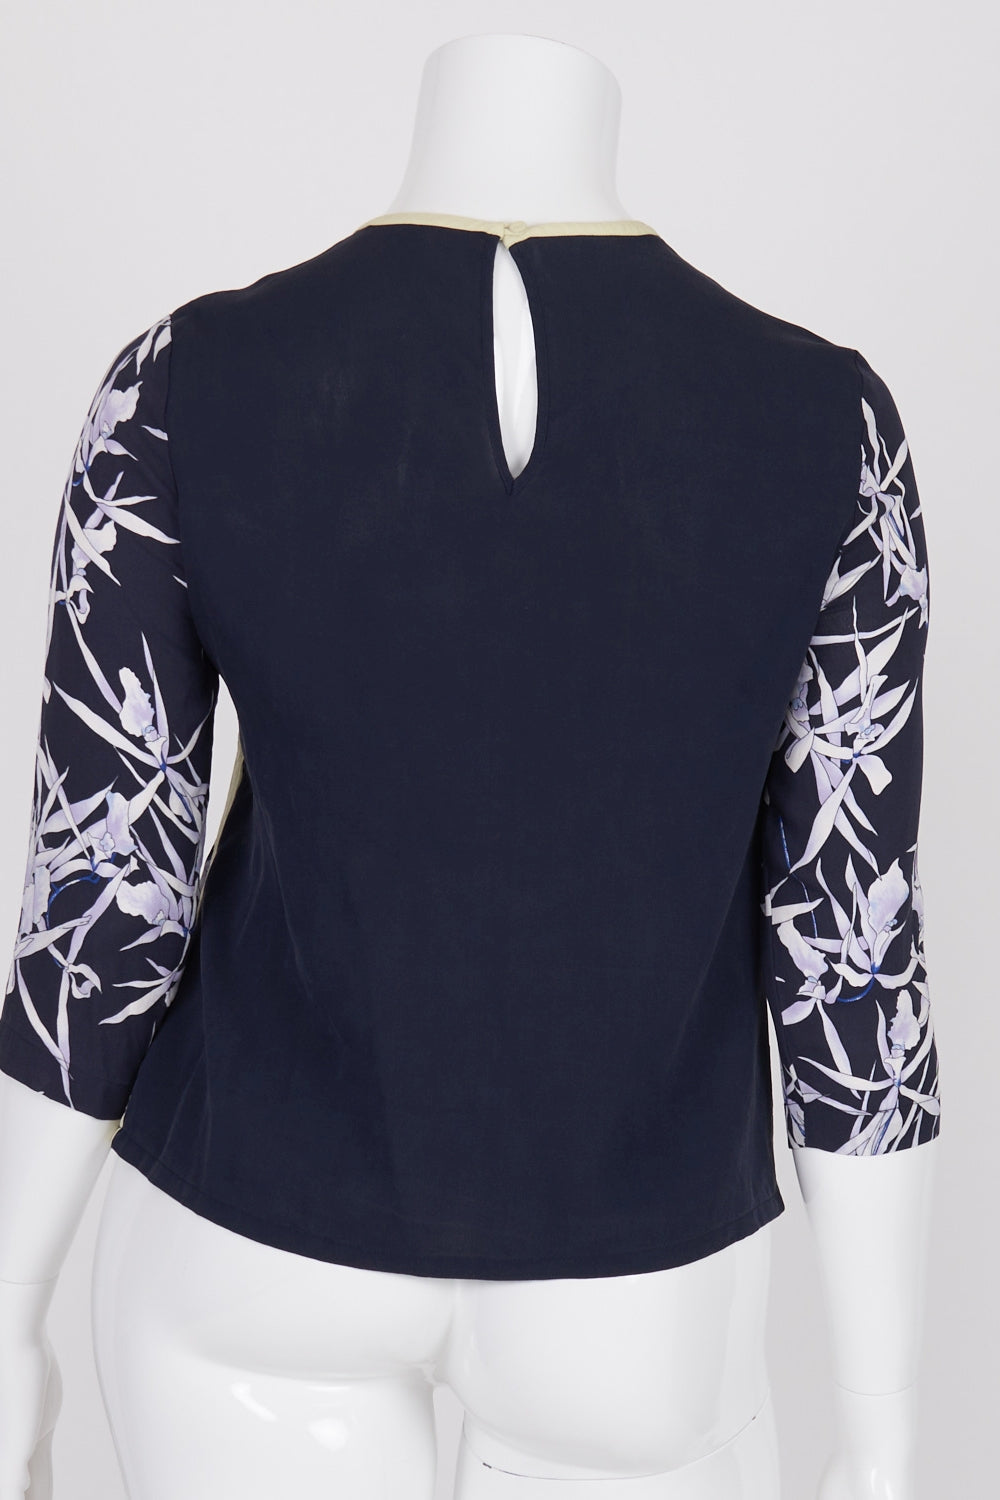 WHISTLES Navy Floral 100% Silk Top 14